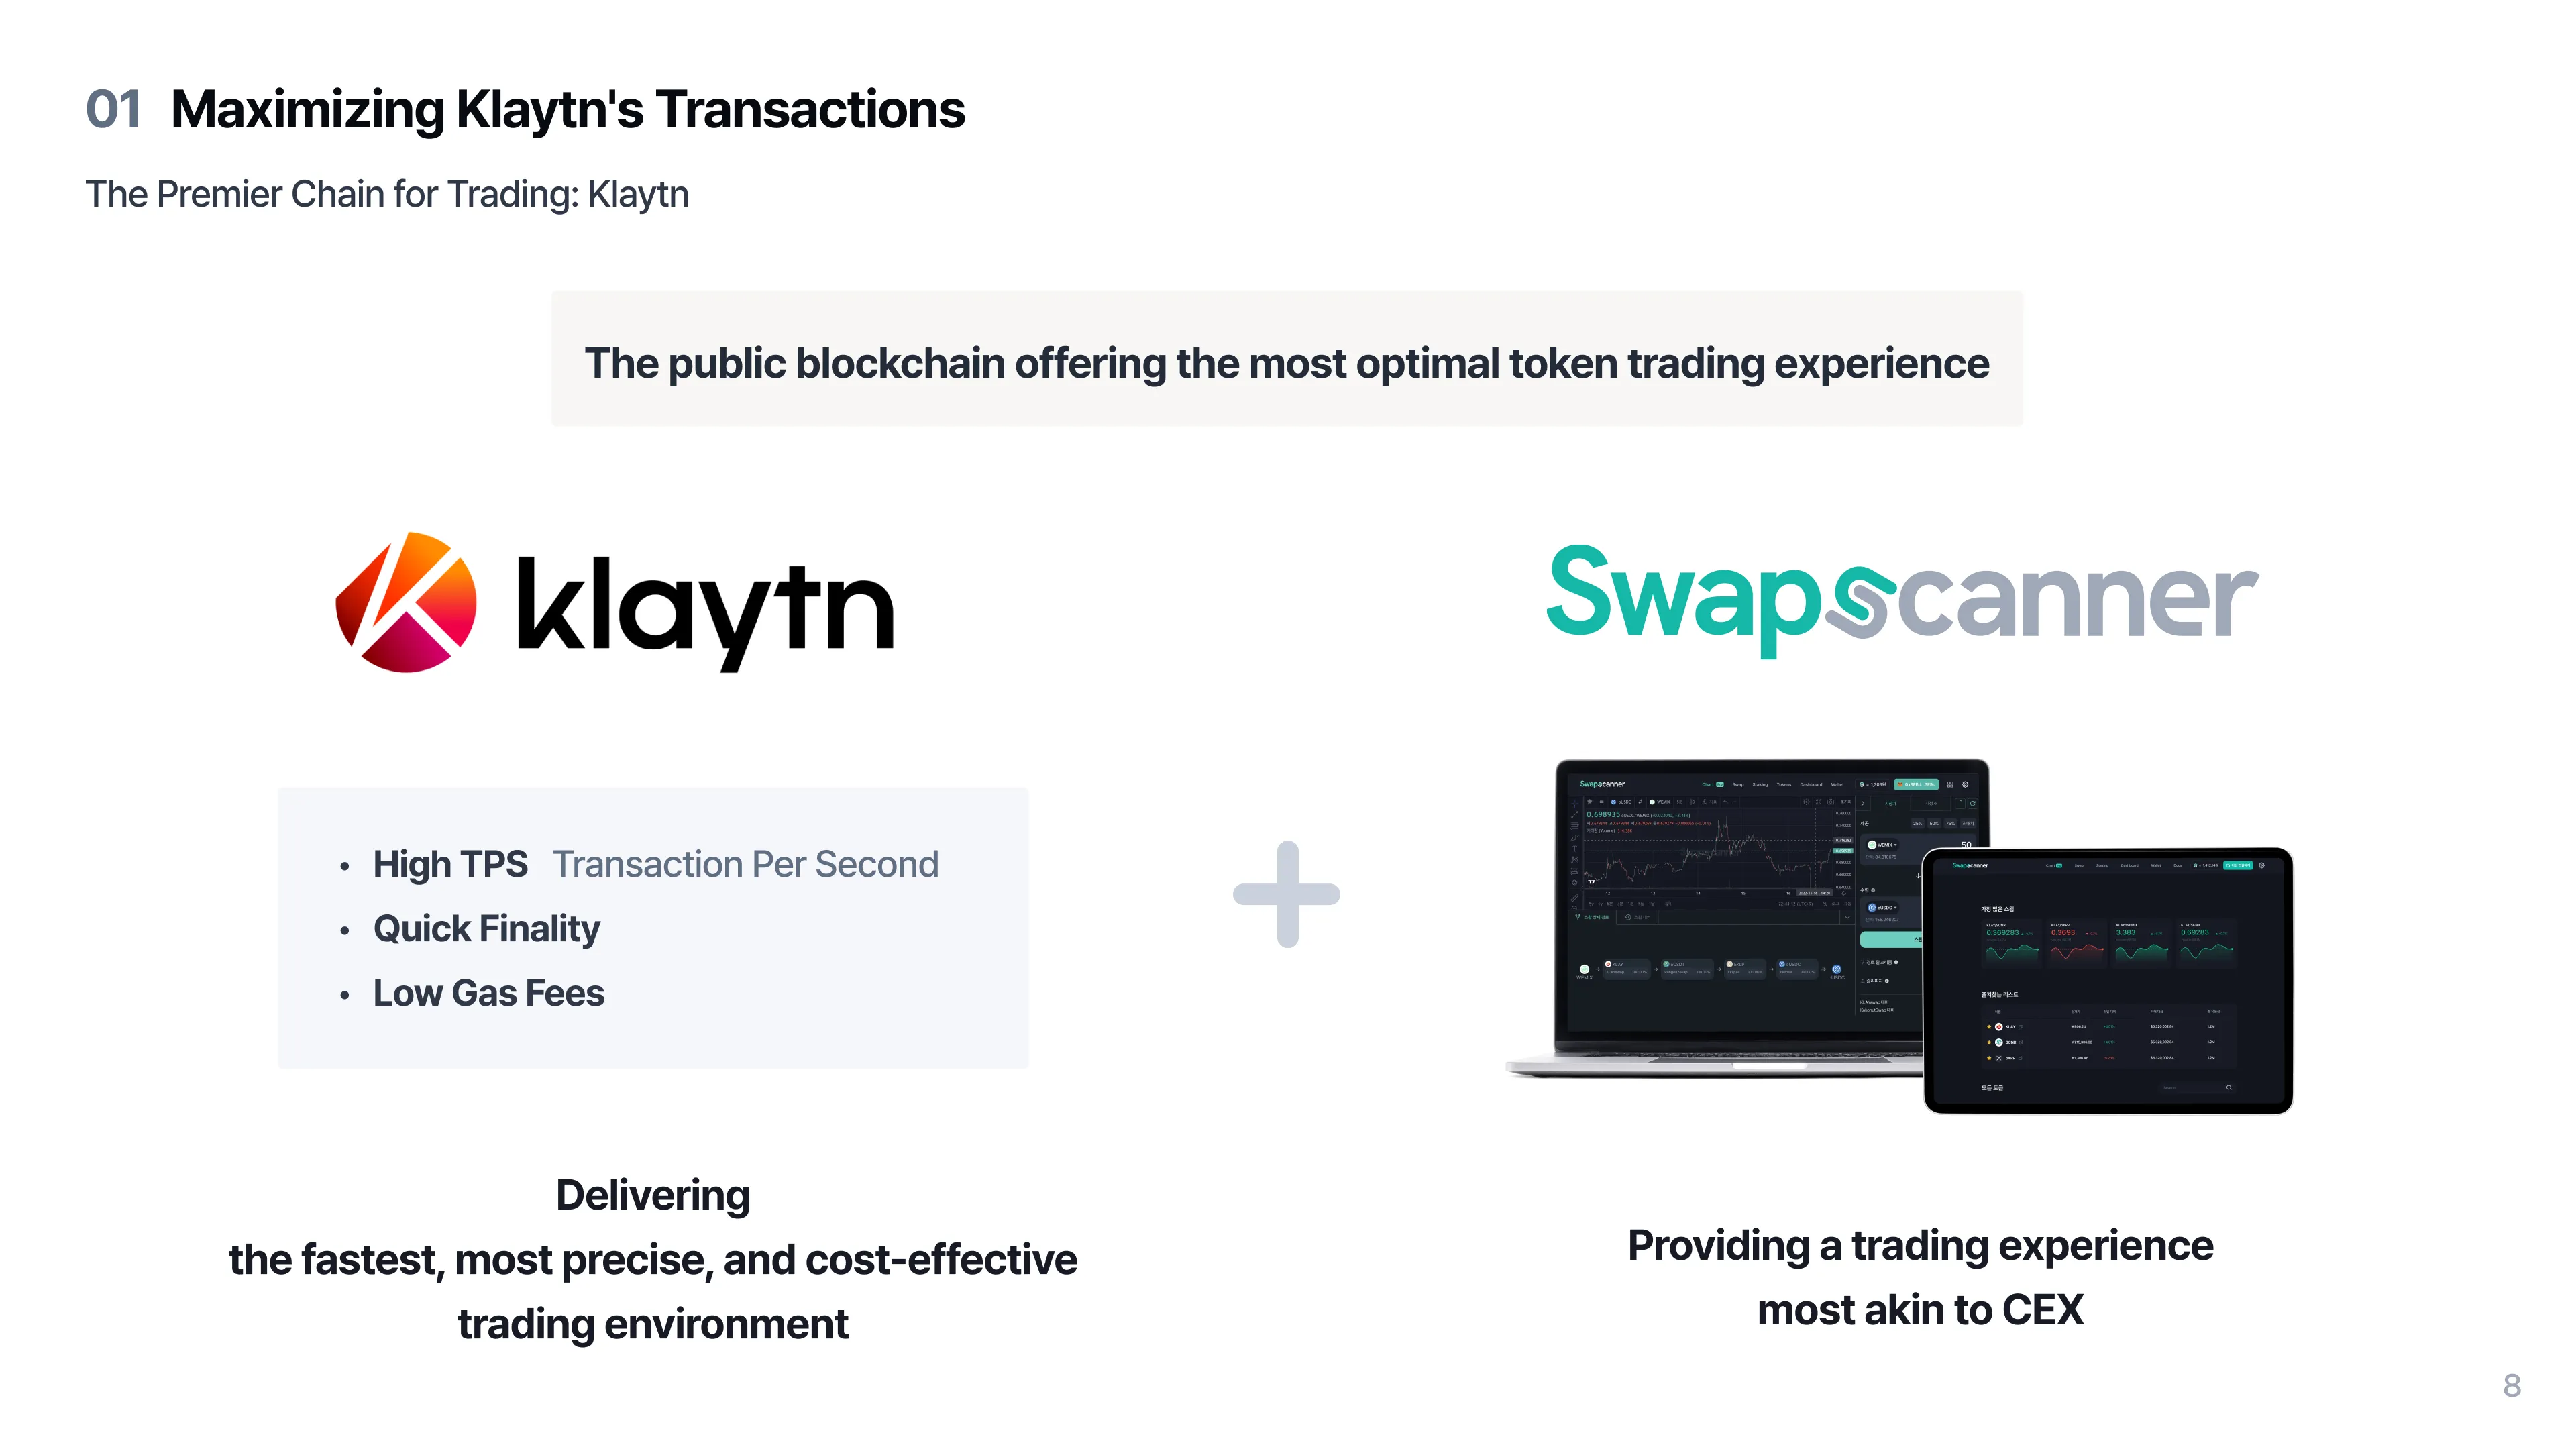 The Best Chain for Trading: Klaytn(1)